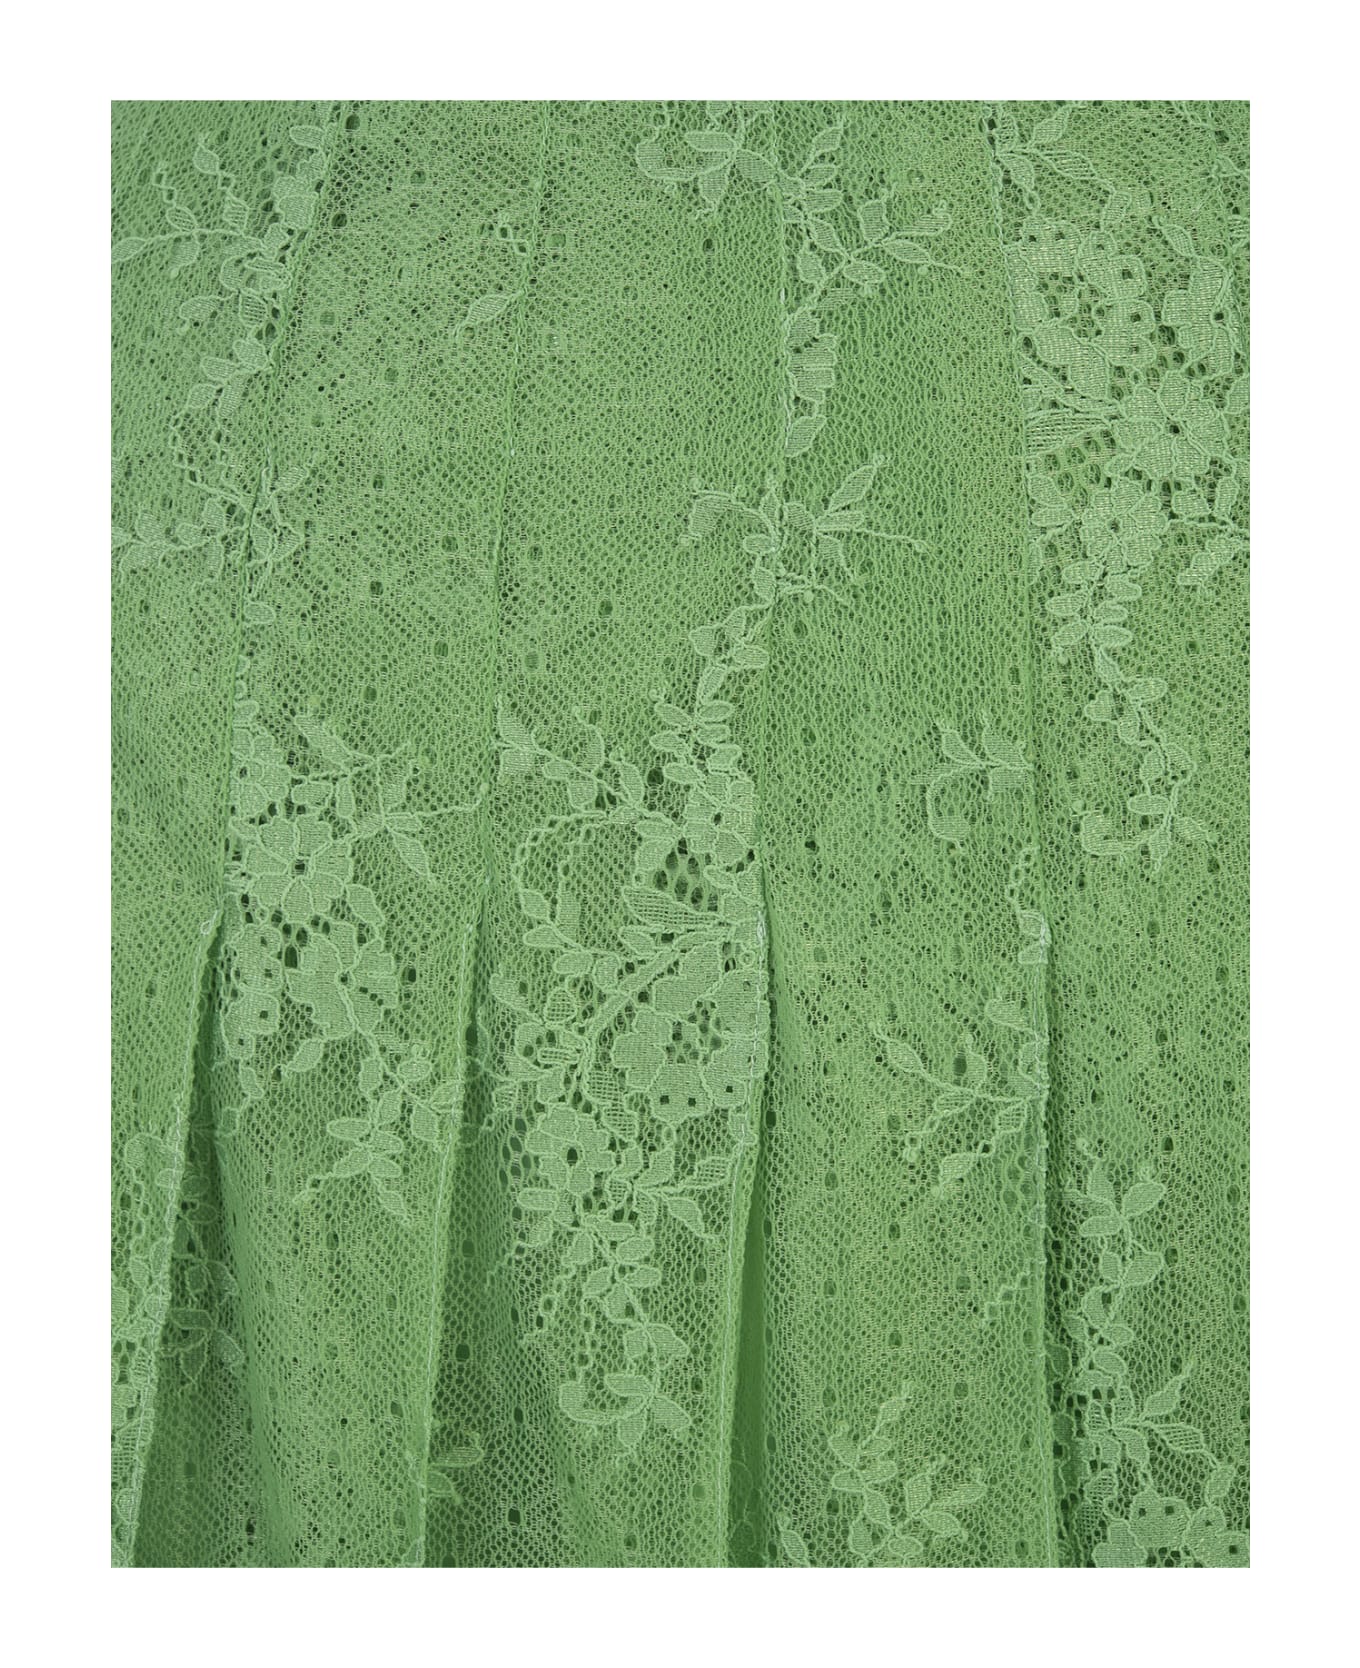 Ermanno Scervino Green Lace Pleated Skirt - Green スカート